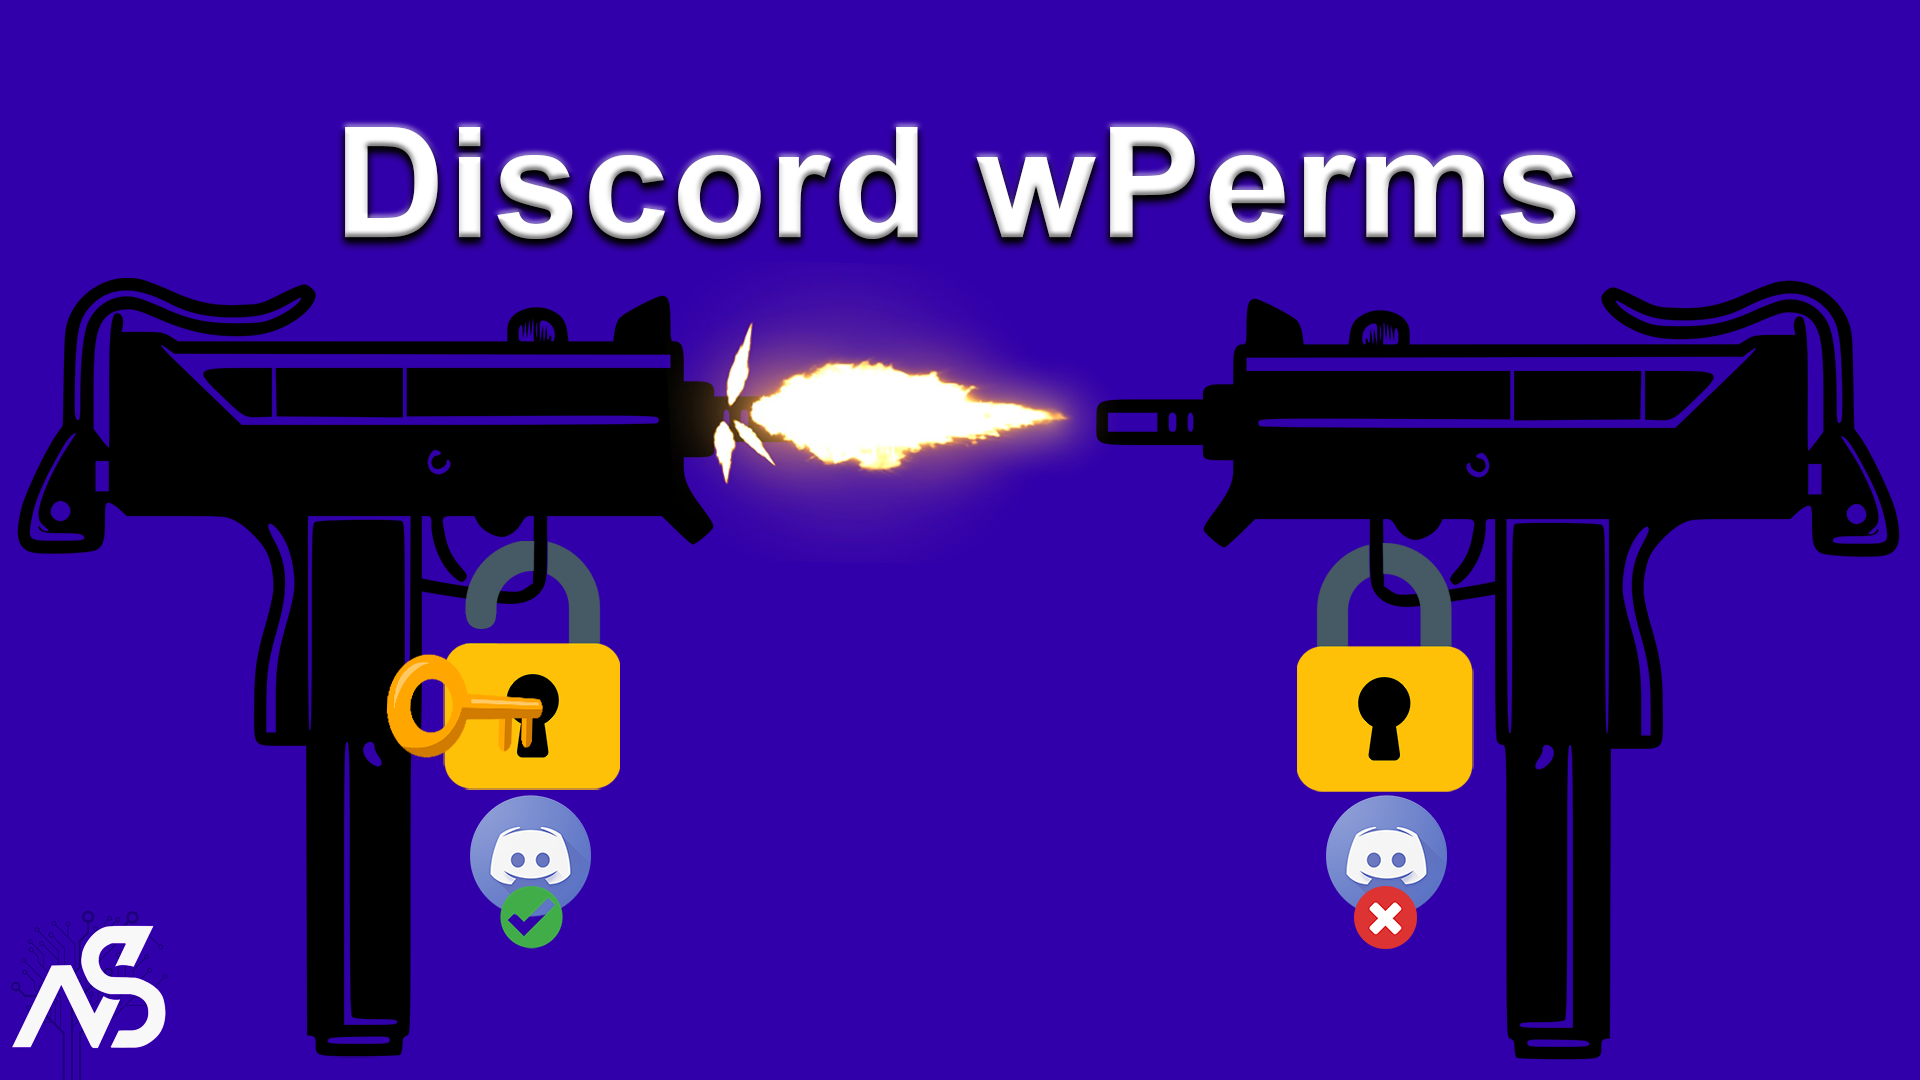 Discord wPerms! Resource